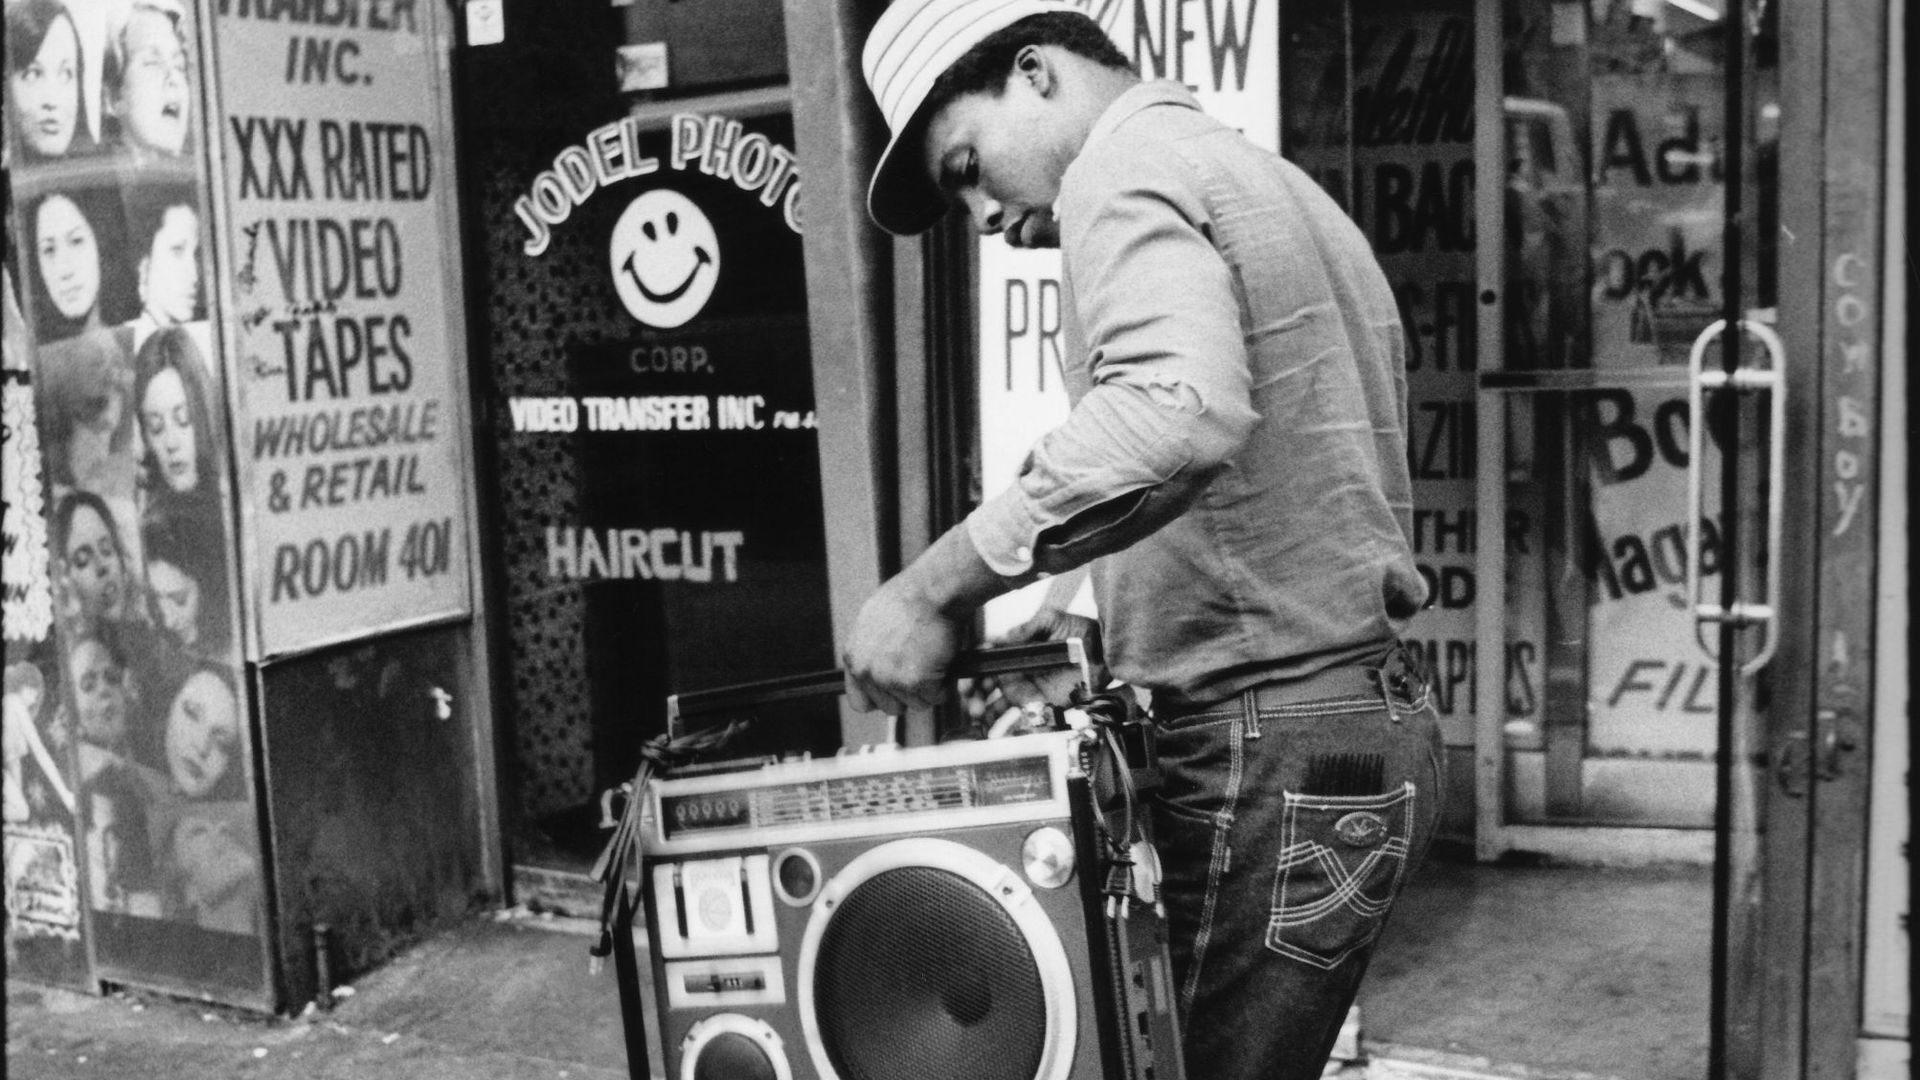 A teenager holding his ghetto blaster on 42nd street New York, USA, 1980. (Photo by: PYMCA/Universal Images Group via Getty Images)
Un adolescent tenant son ghetto blaster sur la 42e rue à New York, USA, 1980